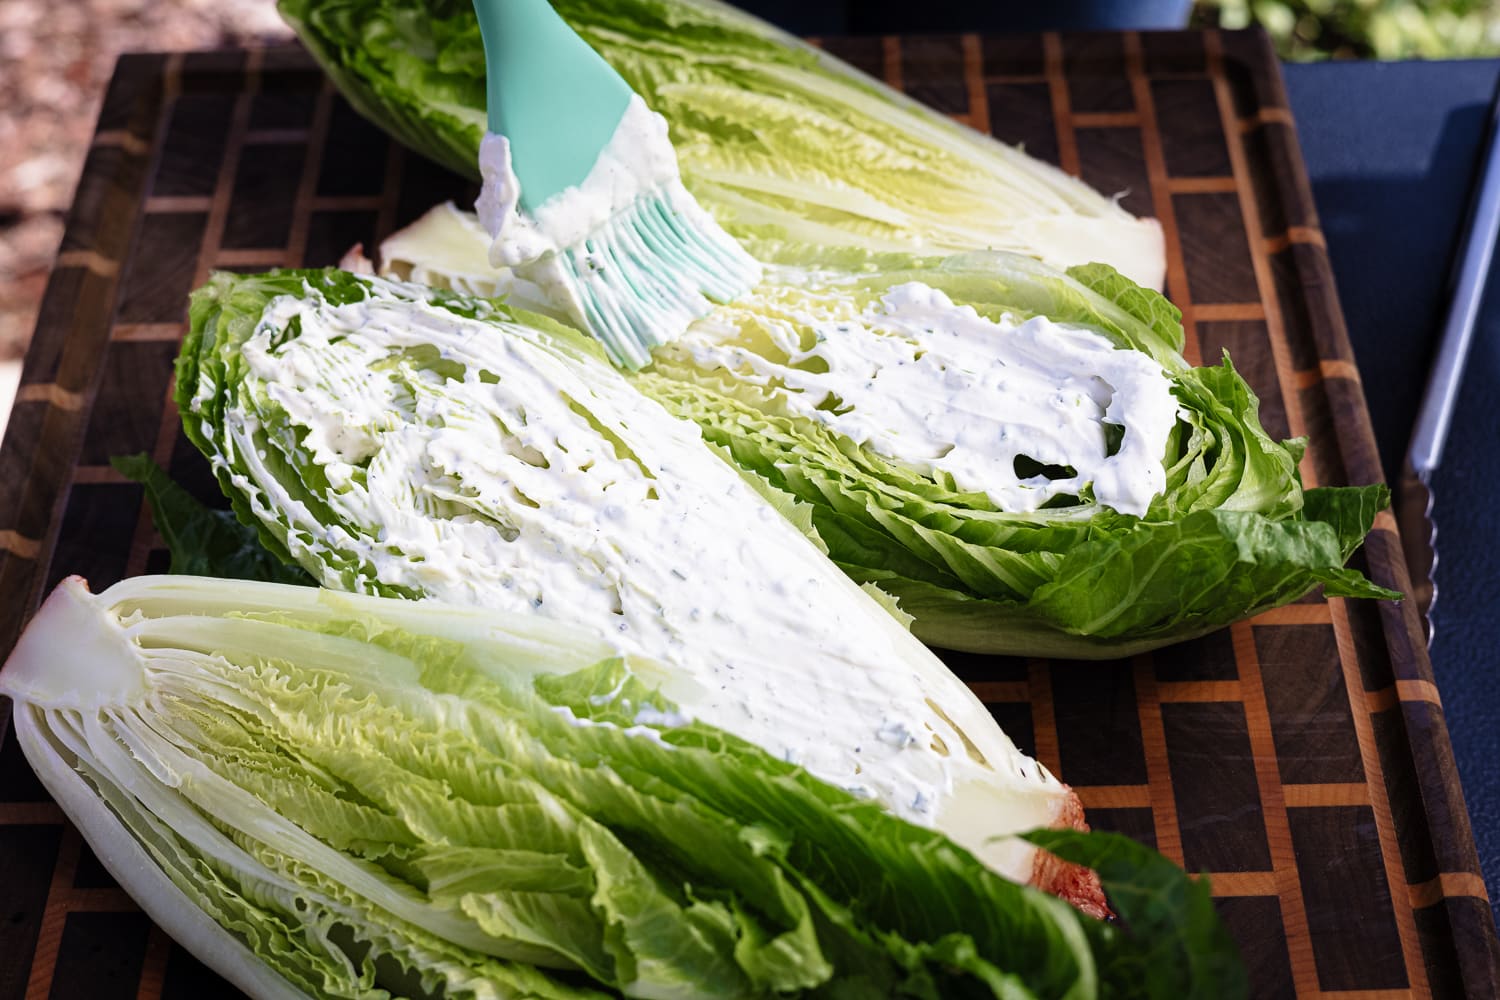 Ranch dressing being spread on romaine hearts with a basting brush.